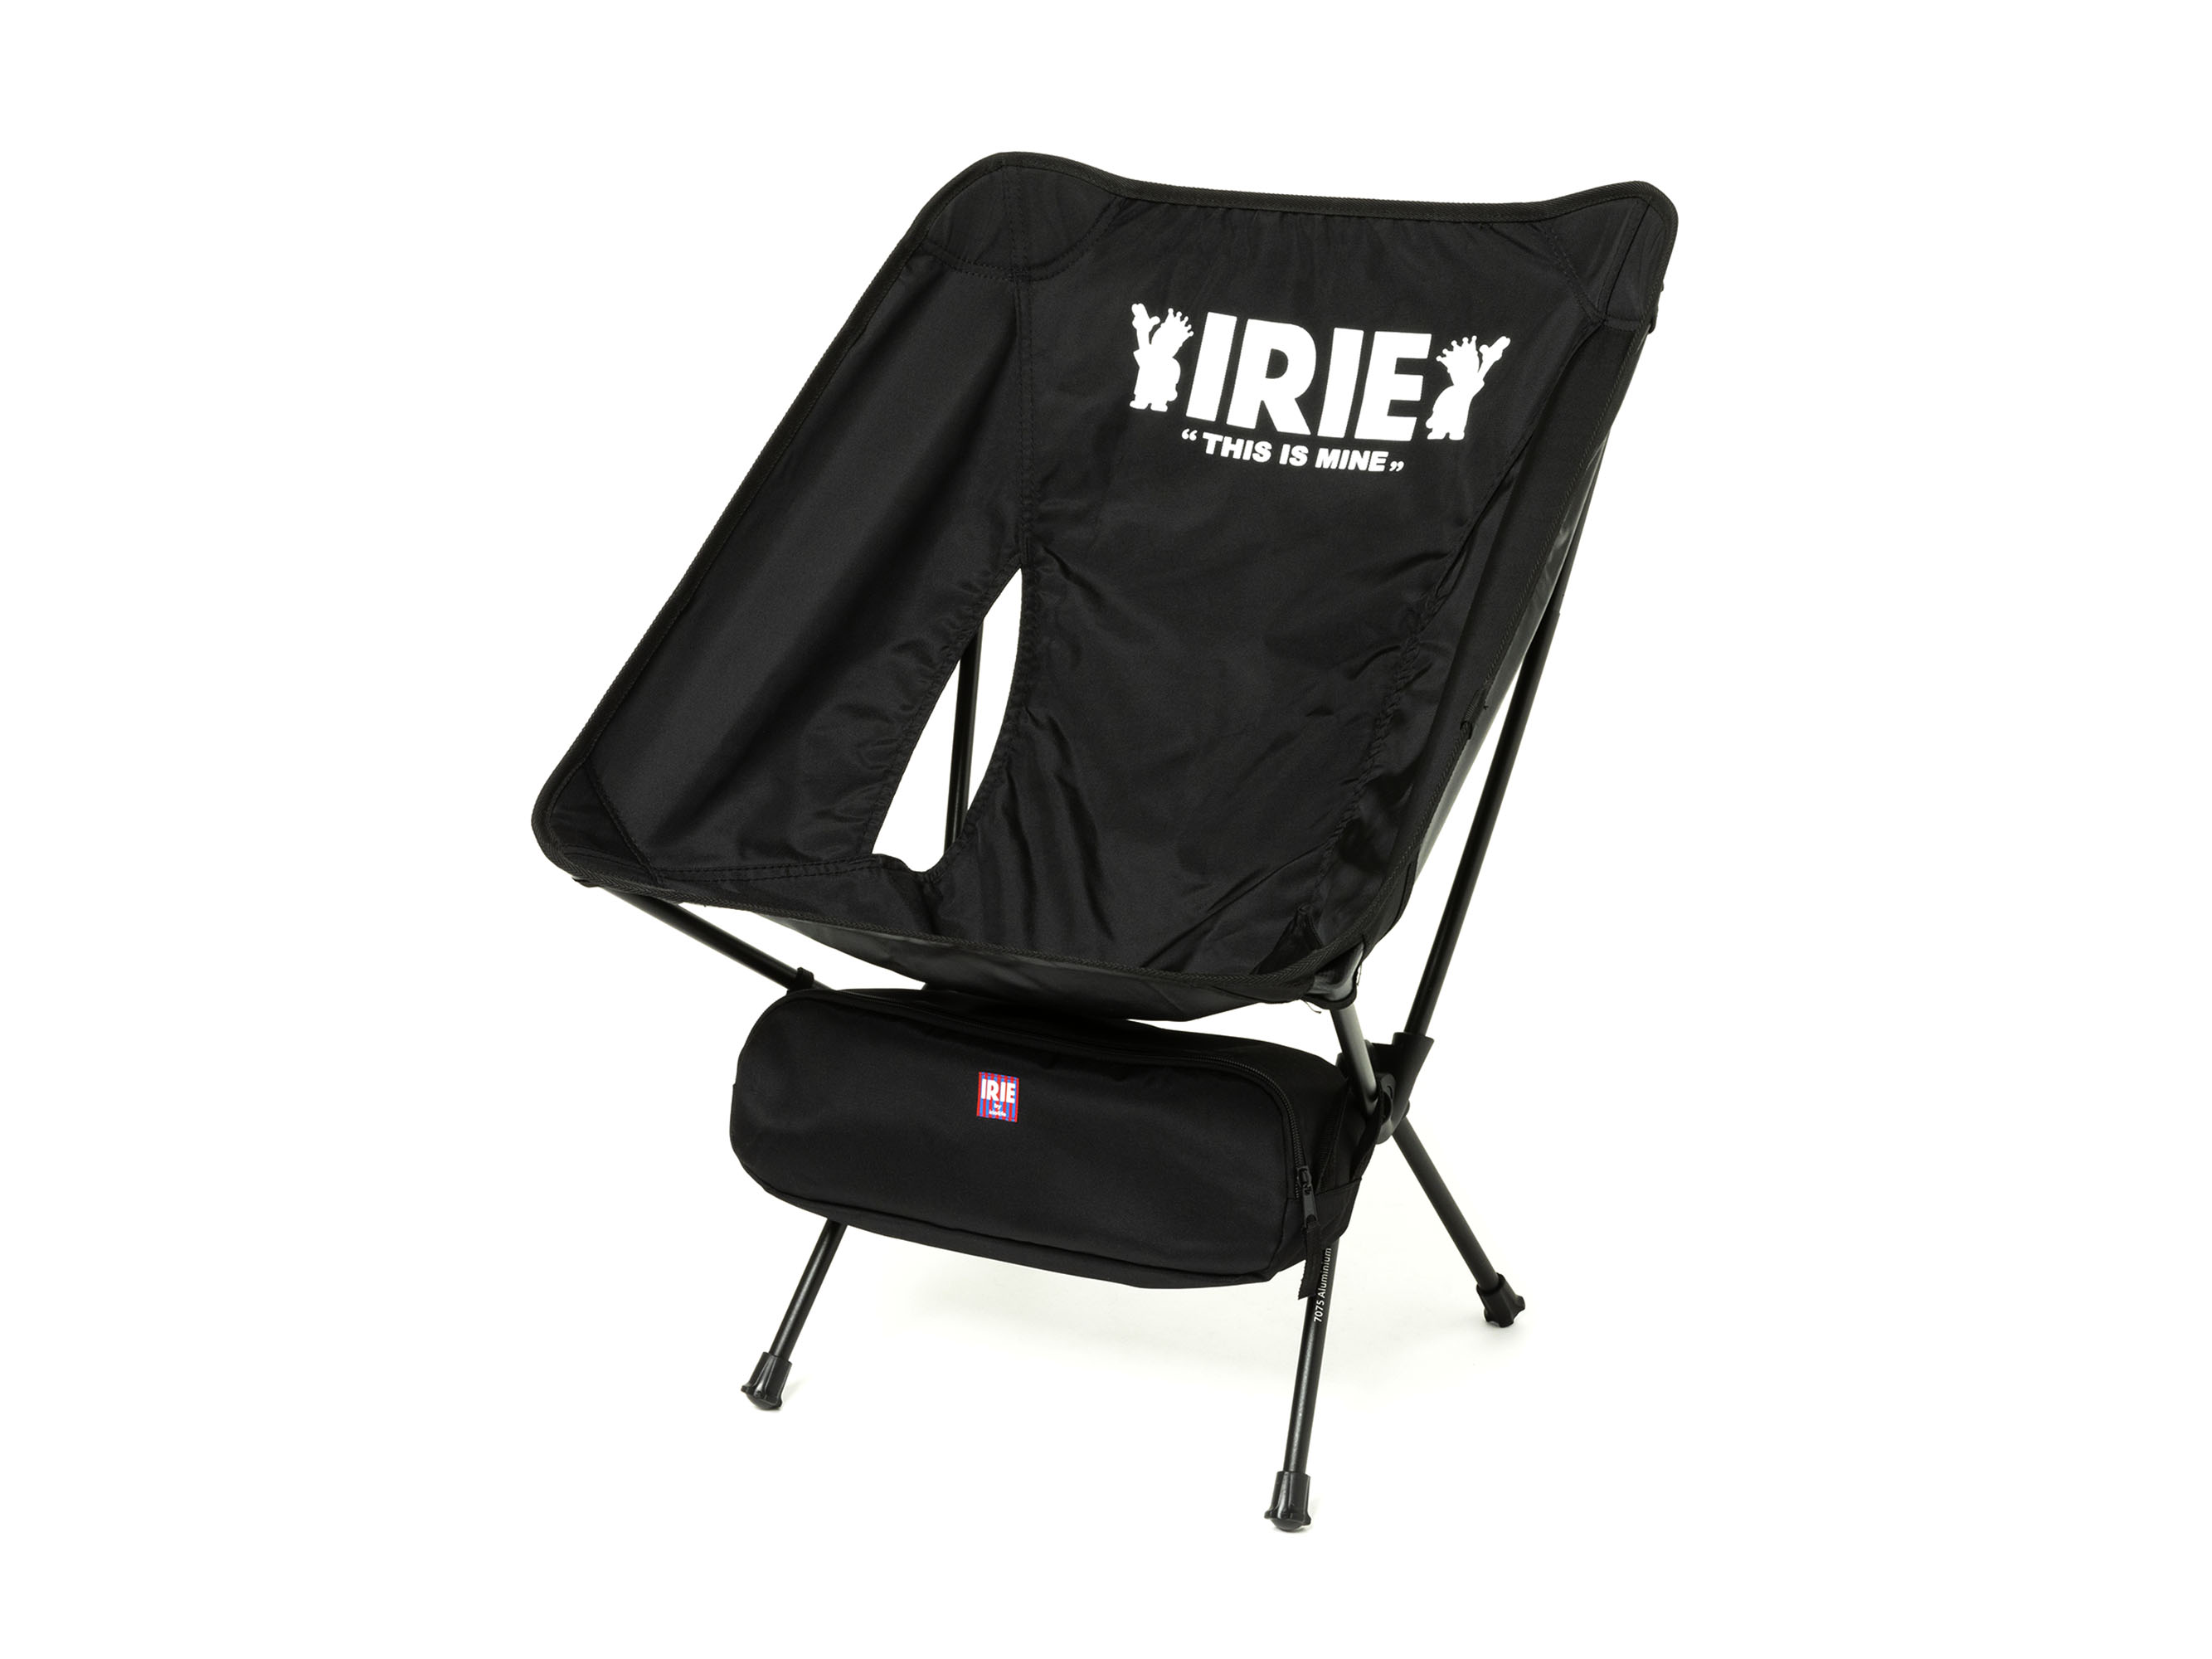 IRIE OUTDOOR FIT CHAIR - IRIE by irielife